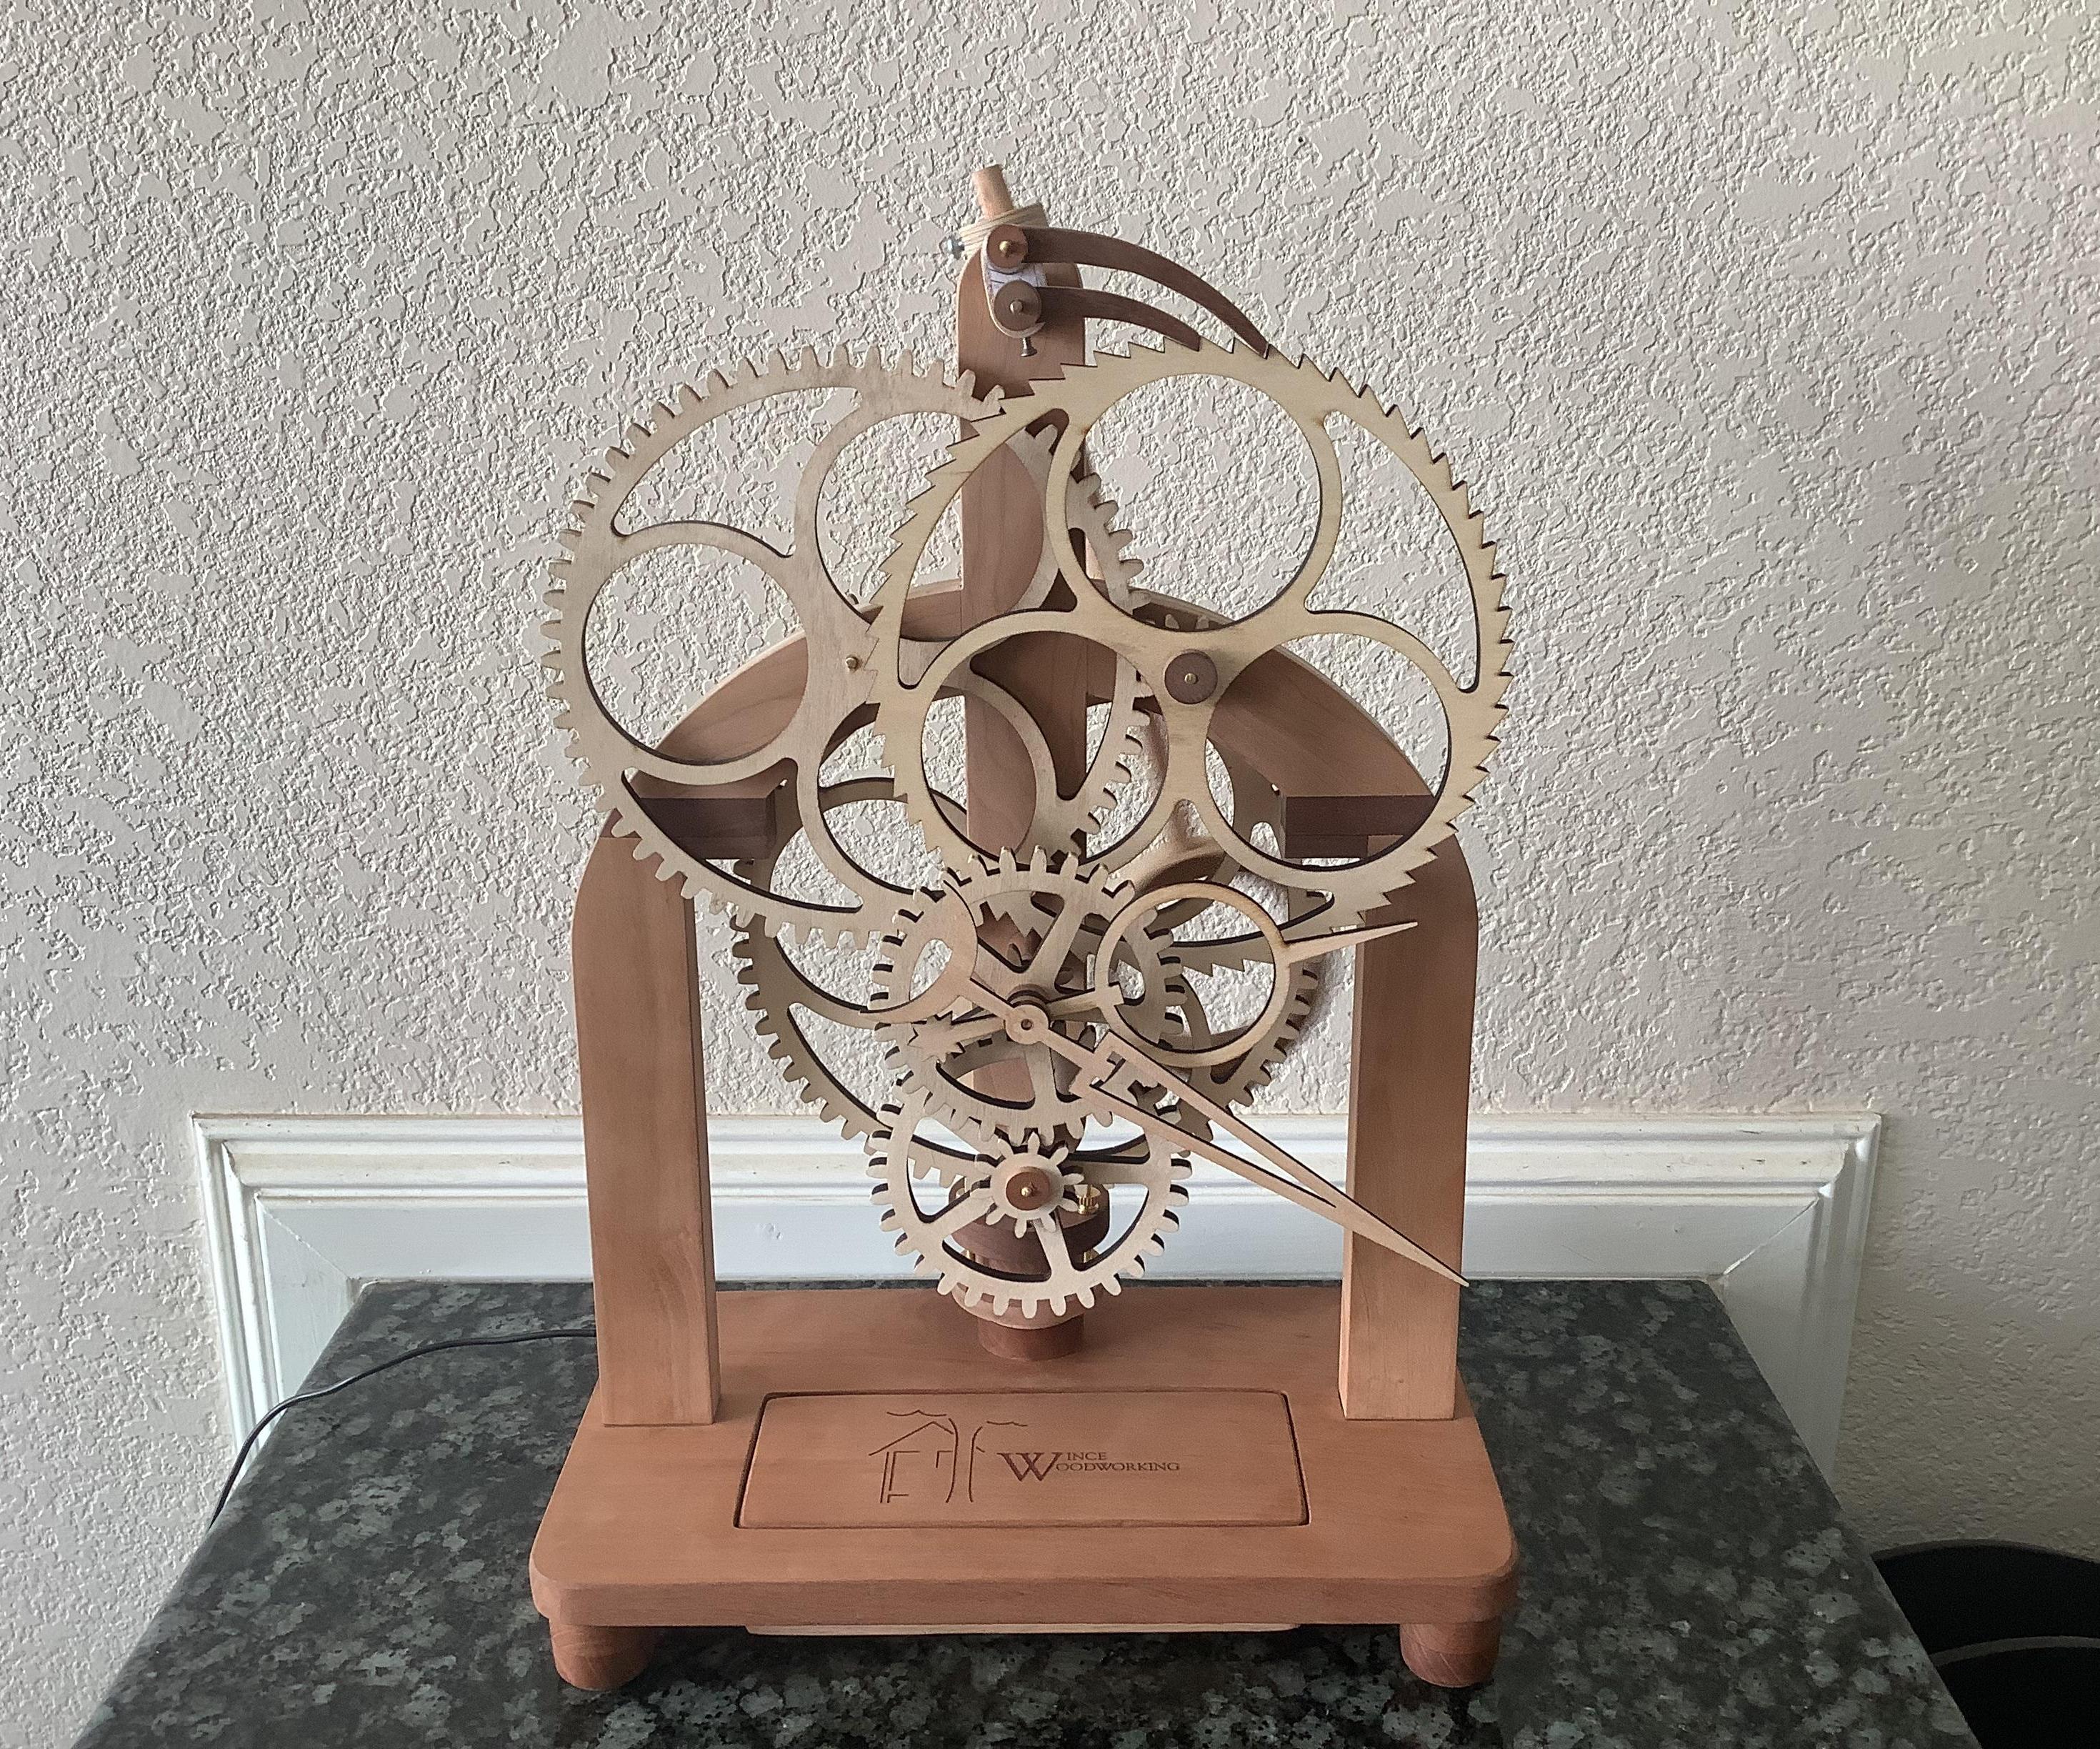 Electromagnetically Impulsed Wooden Gear Clock - DXF Files Included